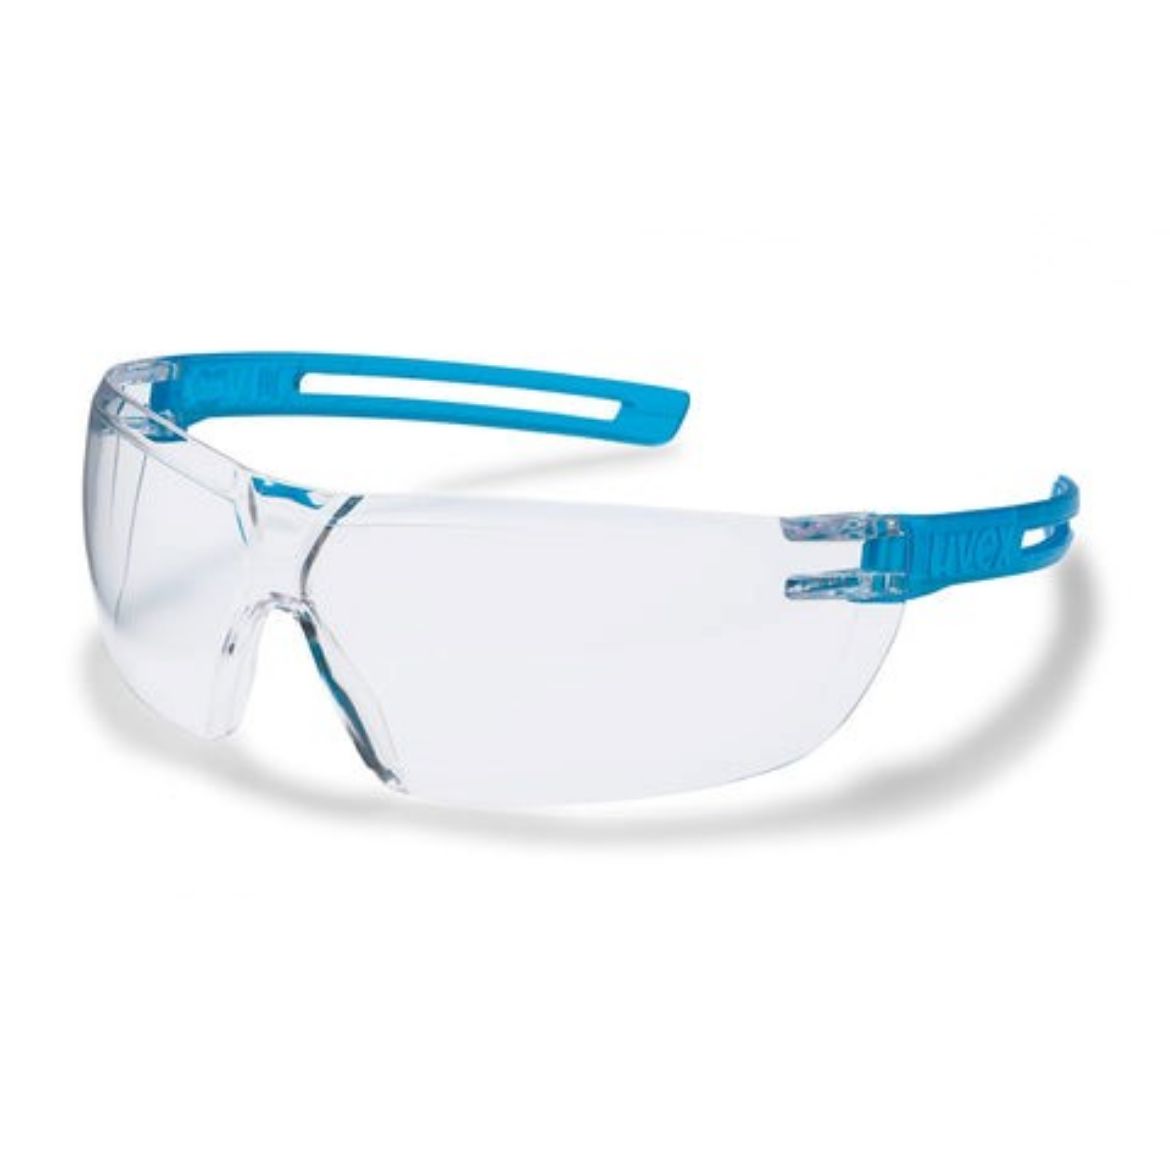 Picture of 9199-200 - UVEX X-FIT SAFETY GLASSES, CLEAR LENS